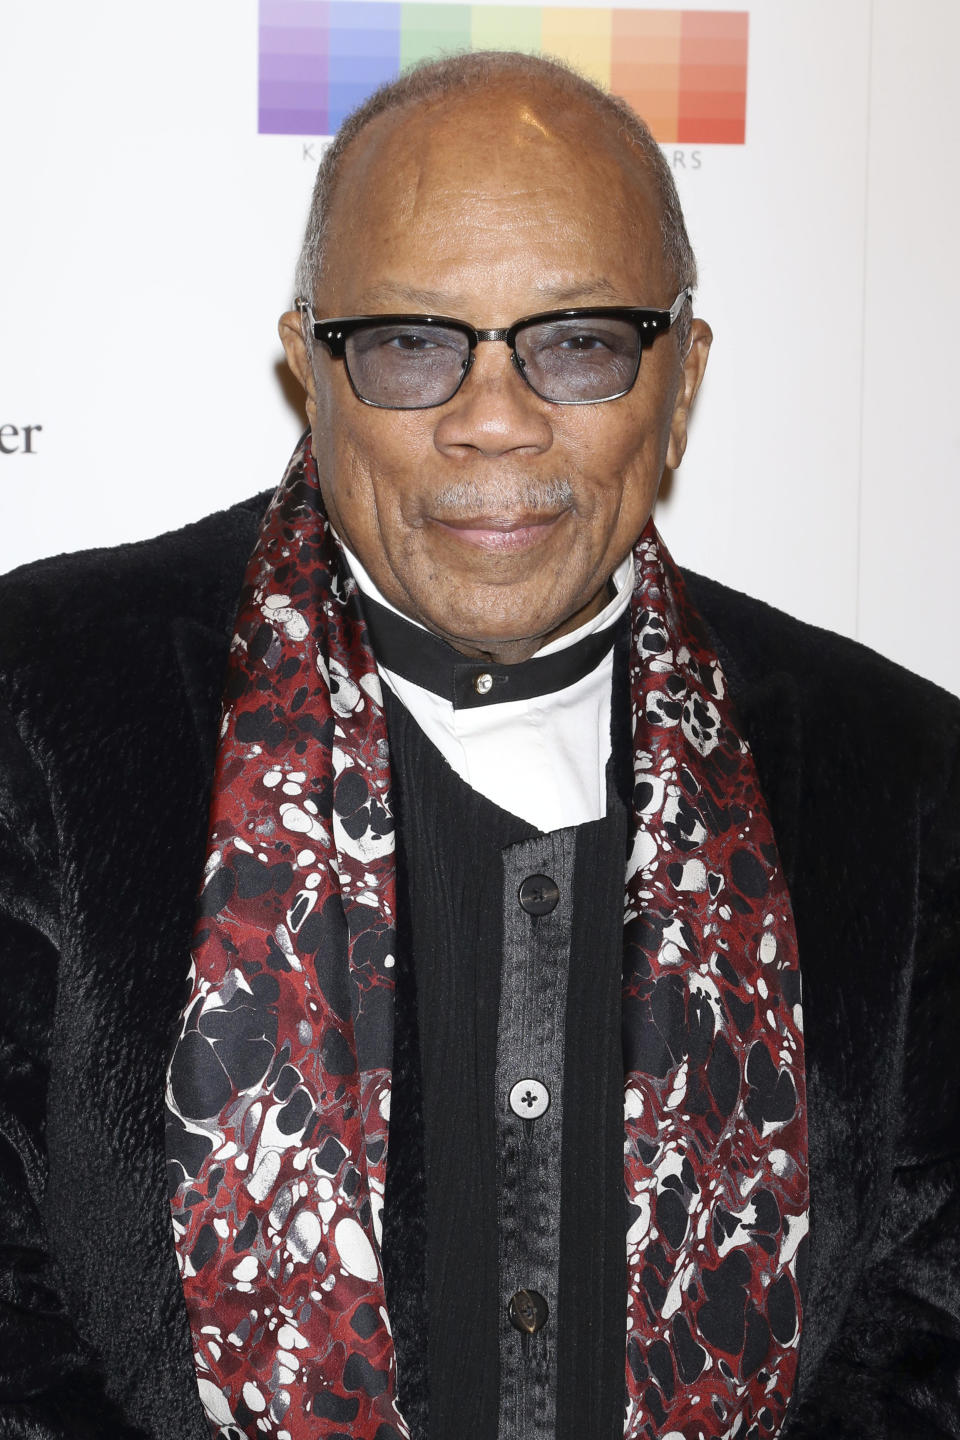 FILE - In this Dec. 3, 2017 file photo, Quincy Jones attends the 40th Annual Kennedy Center Honors at The Kennedy Center Hall of States in Washington. The Recording Academy’s Task Force on Diversity and Inclusion is a launching a new initiative announced Friday, Feb. 1, 2019, to create and expand more opportunities to female music producers and engineers. More than 200 musicians, labels and others have already pledged, including Jones, Lady Gaga, Justin Bieber, Pearl Jam, Pharrell and Ariana Grande. (Photo by Greg Allen/Invision/AP, File)